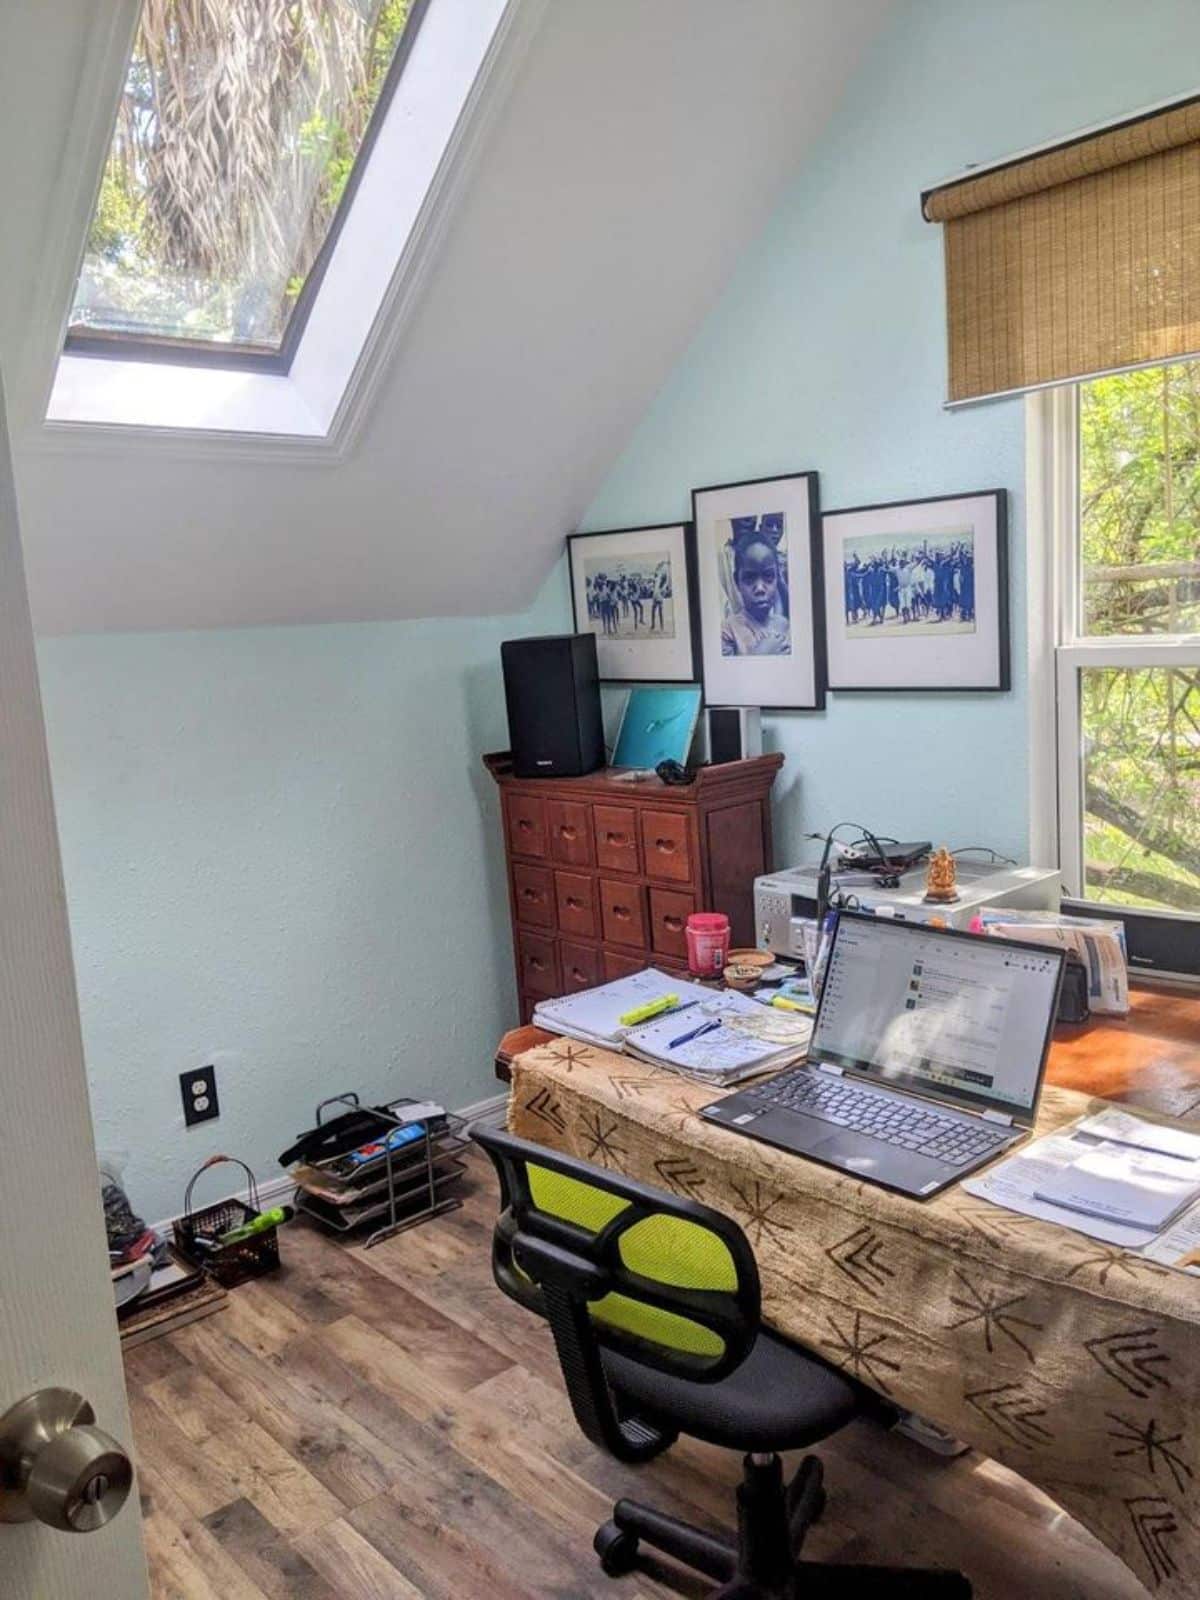 Living area of 2 Bedroom Tiny House with Land has a work setup desk